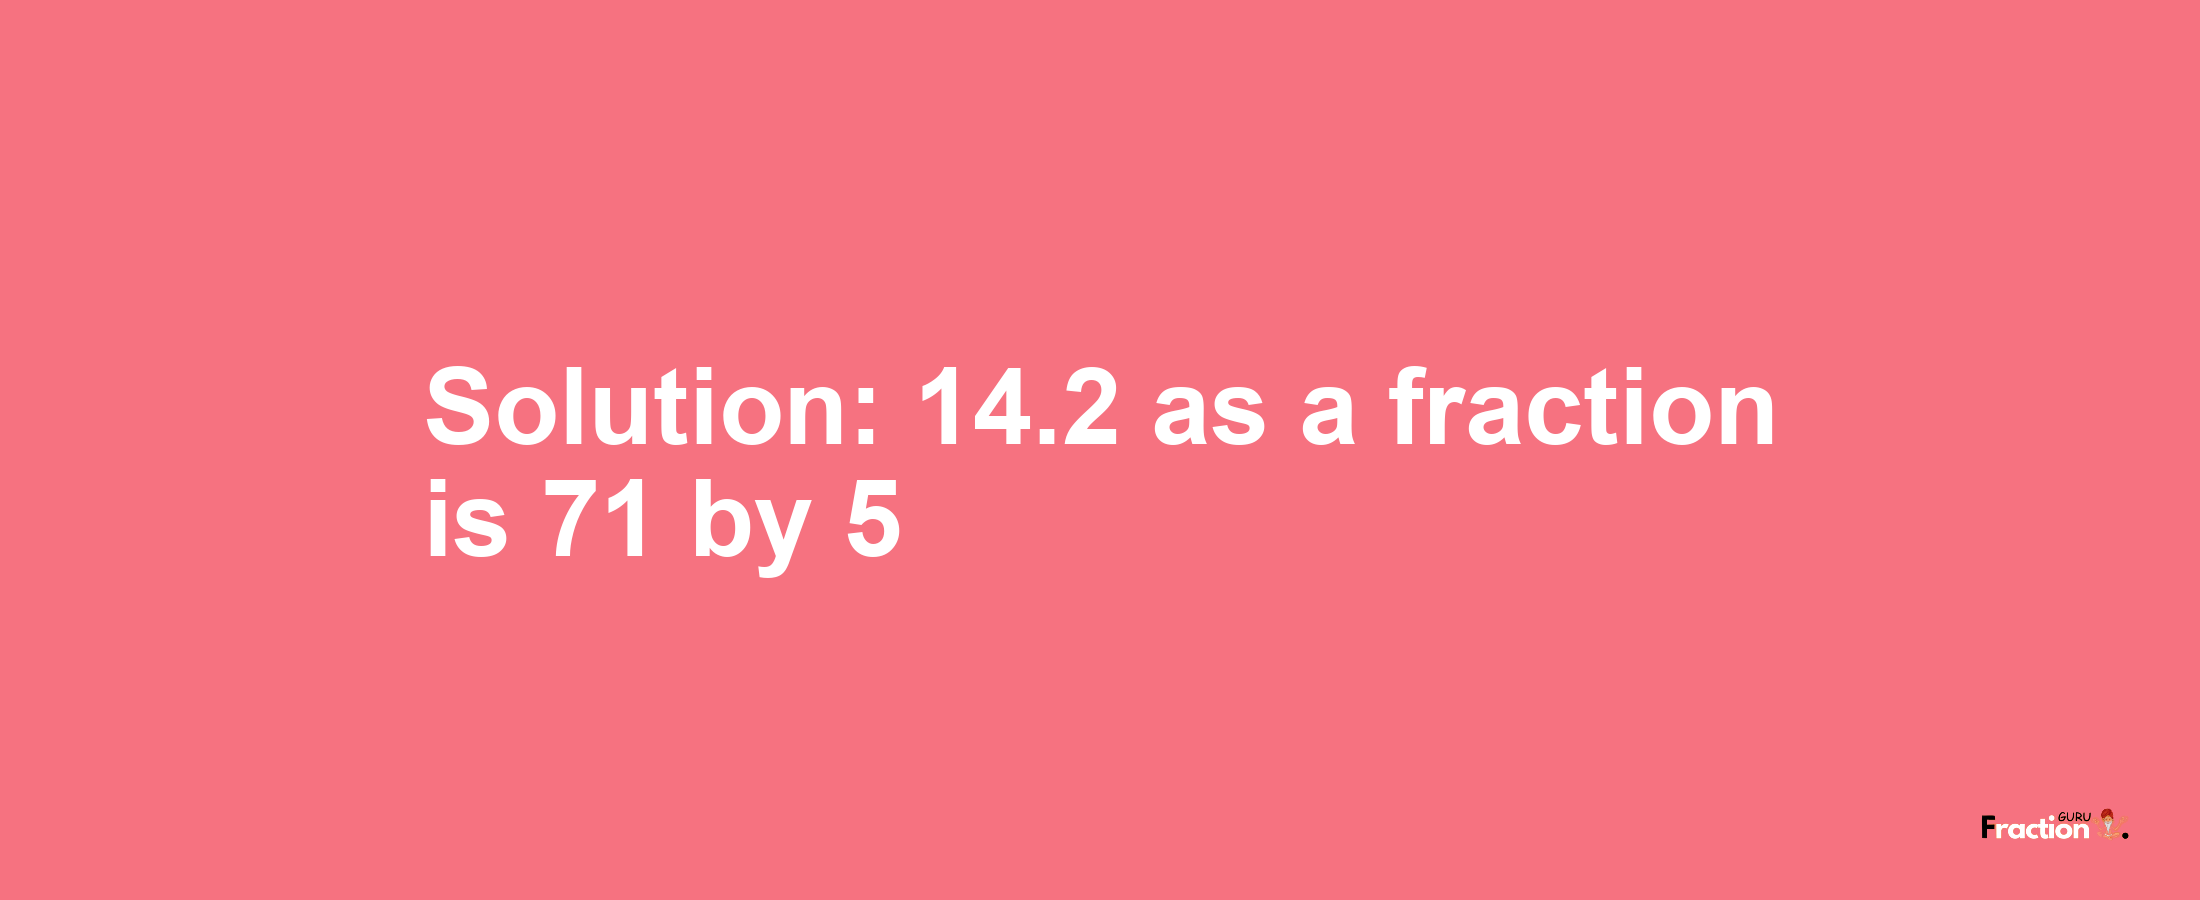 Solution:14.2 as a fraction is 71/5